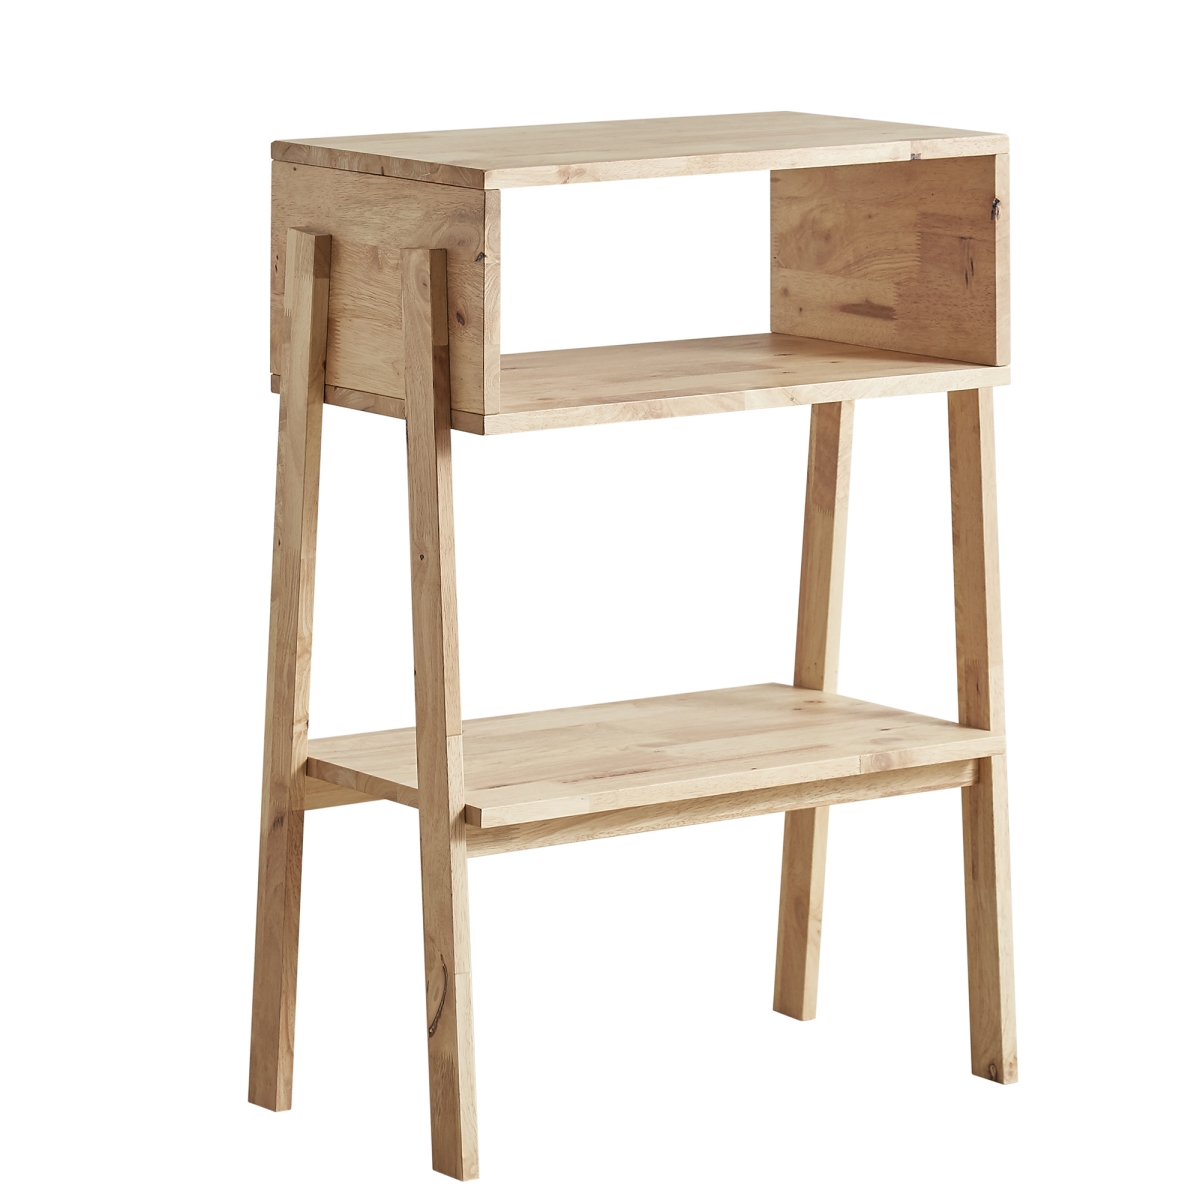 D4796-na 36 In. Mid Century Open Wood Storage Console Table, Natural